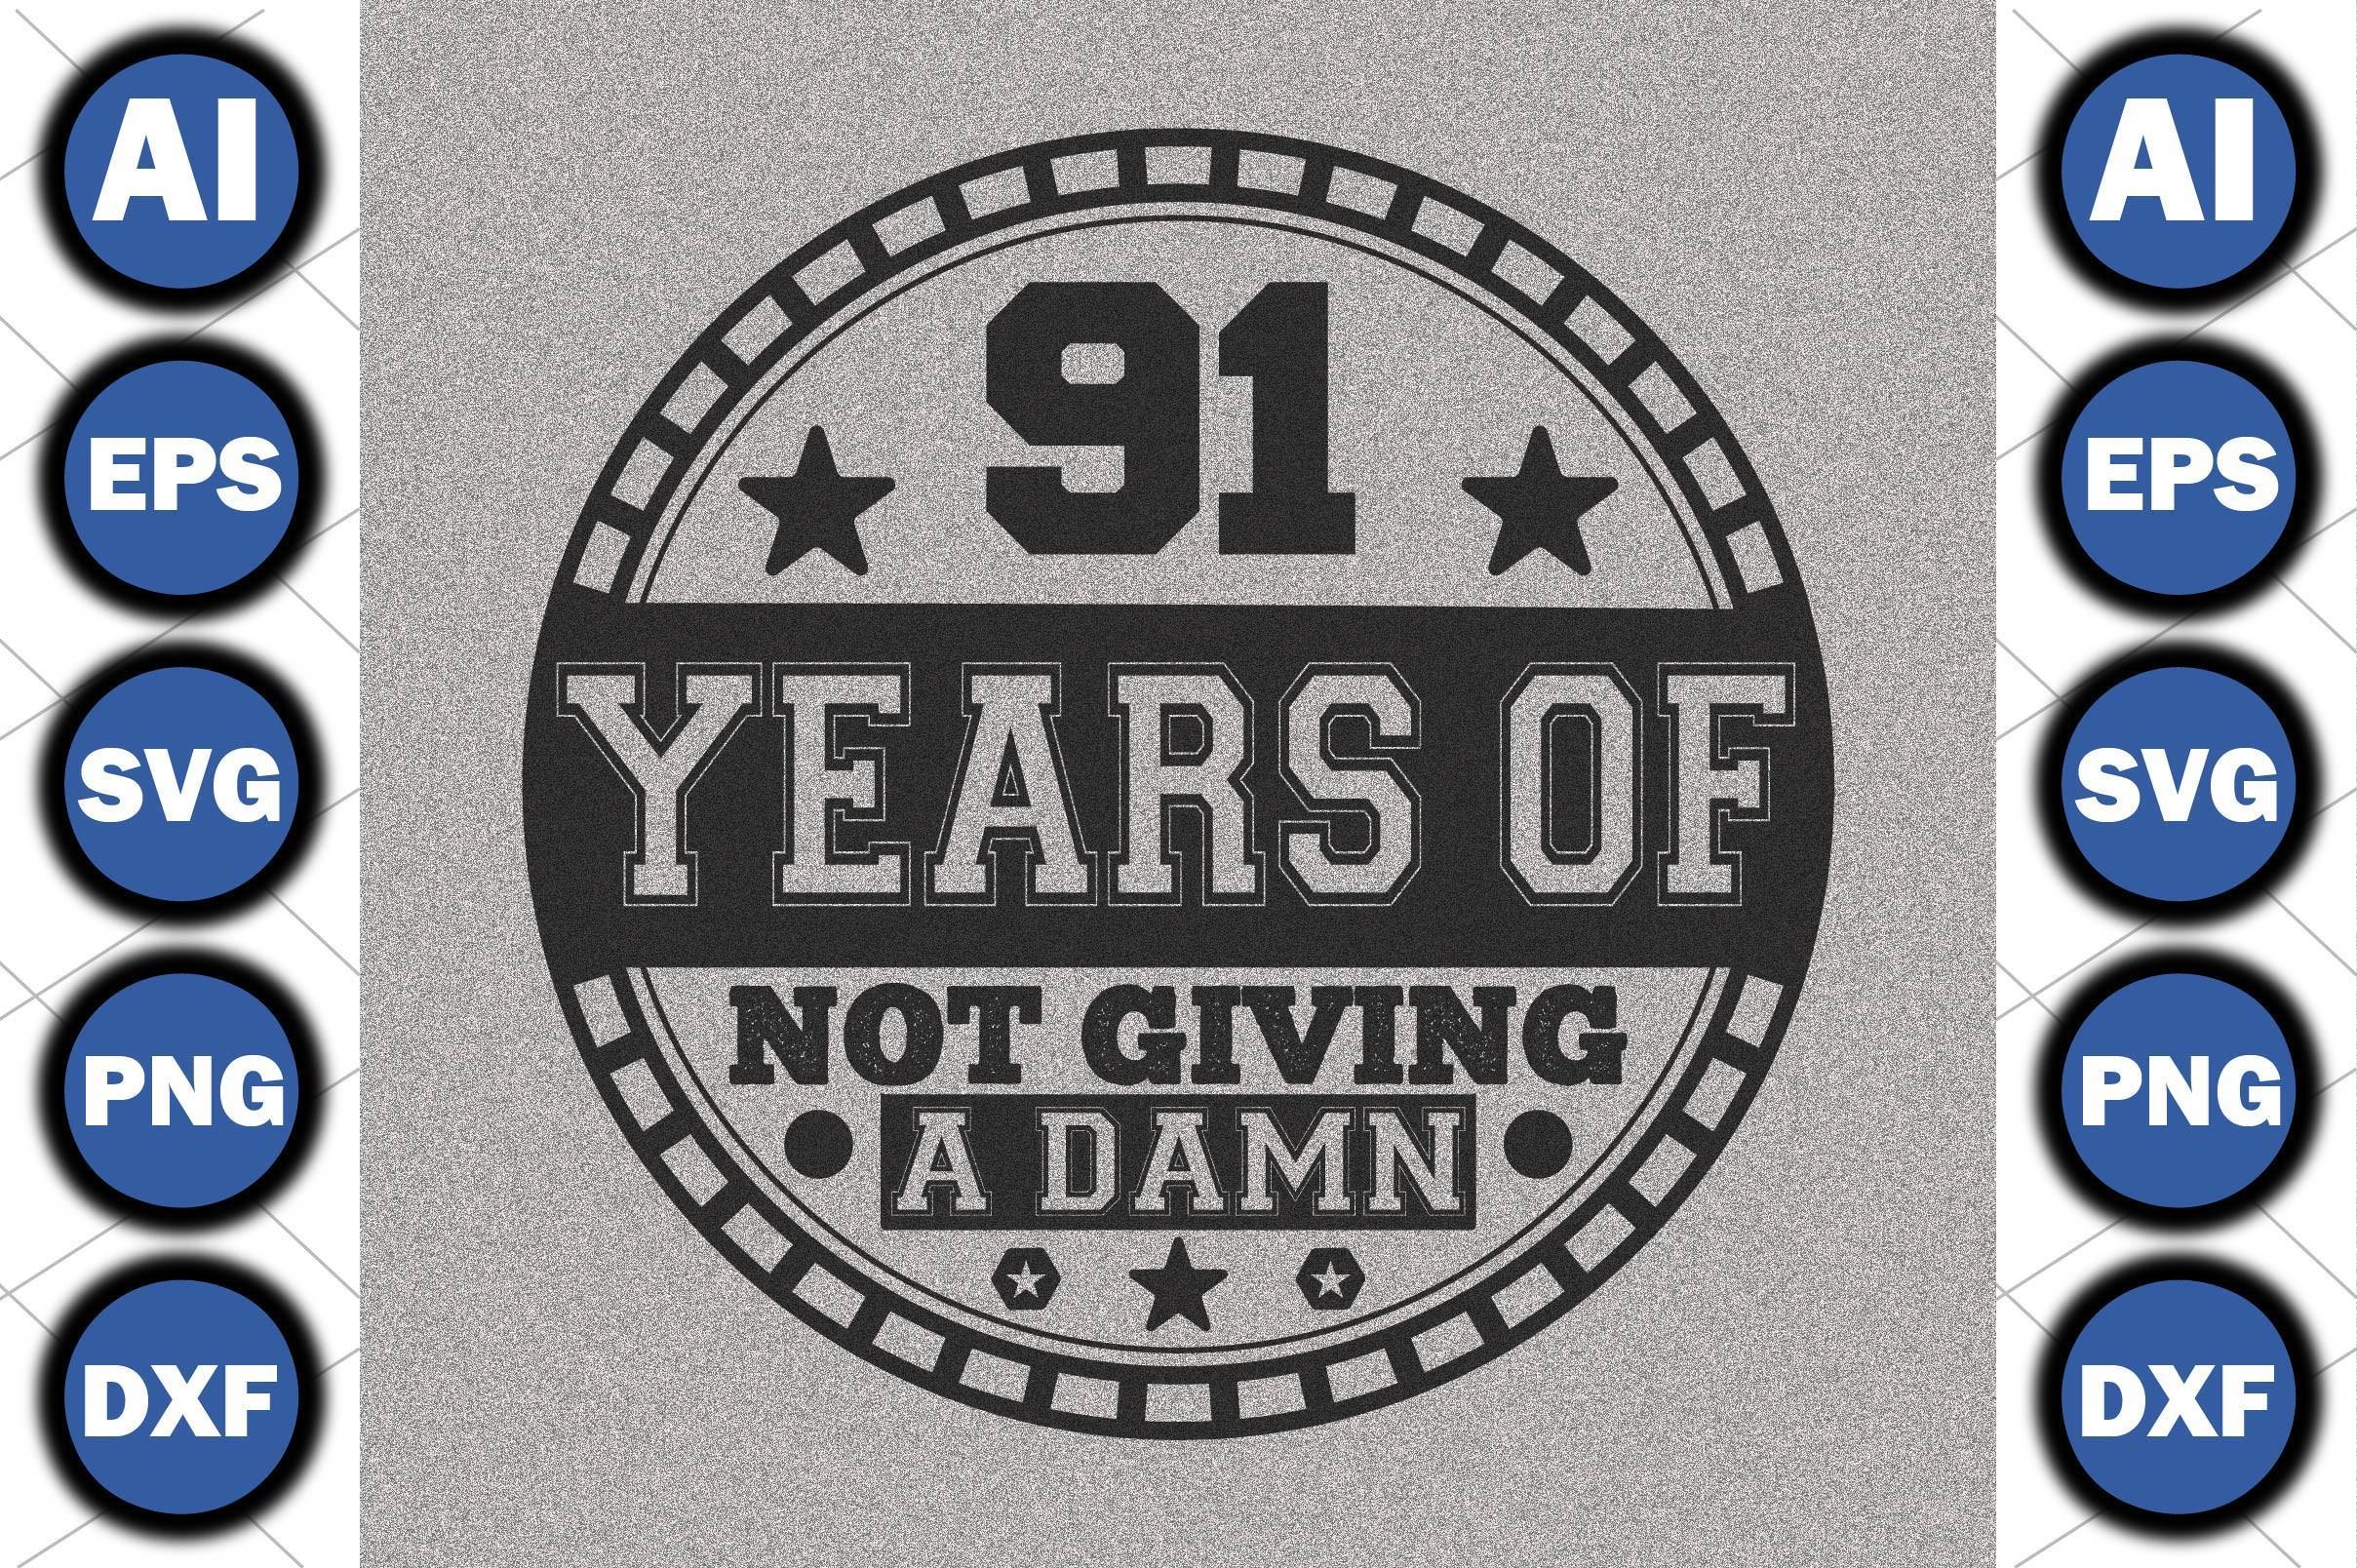 91 Years of Not Giving a Damn